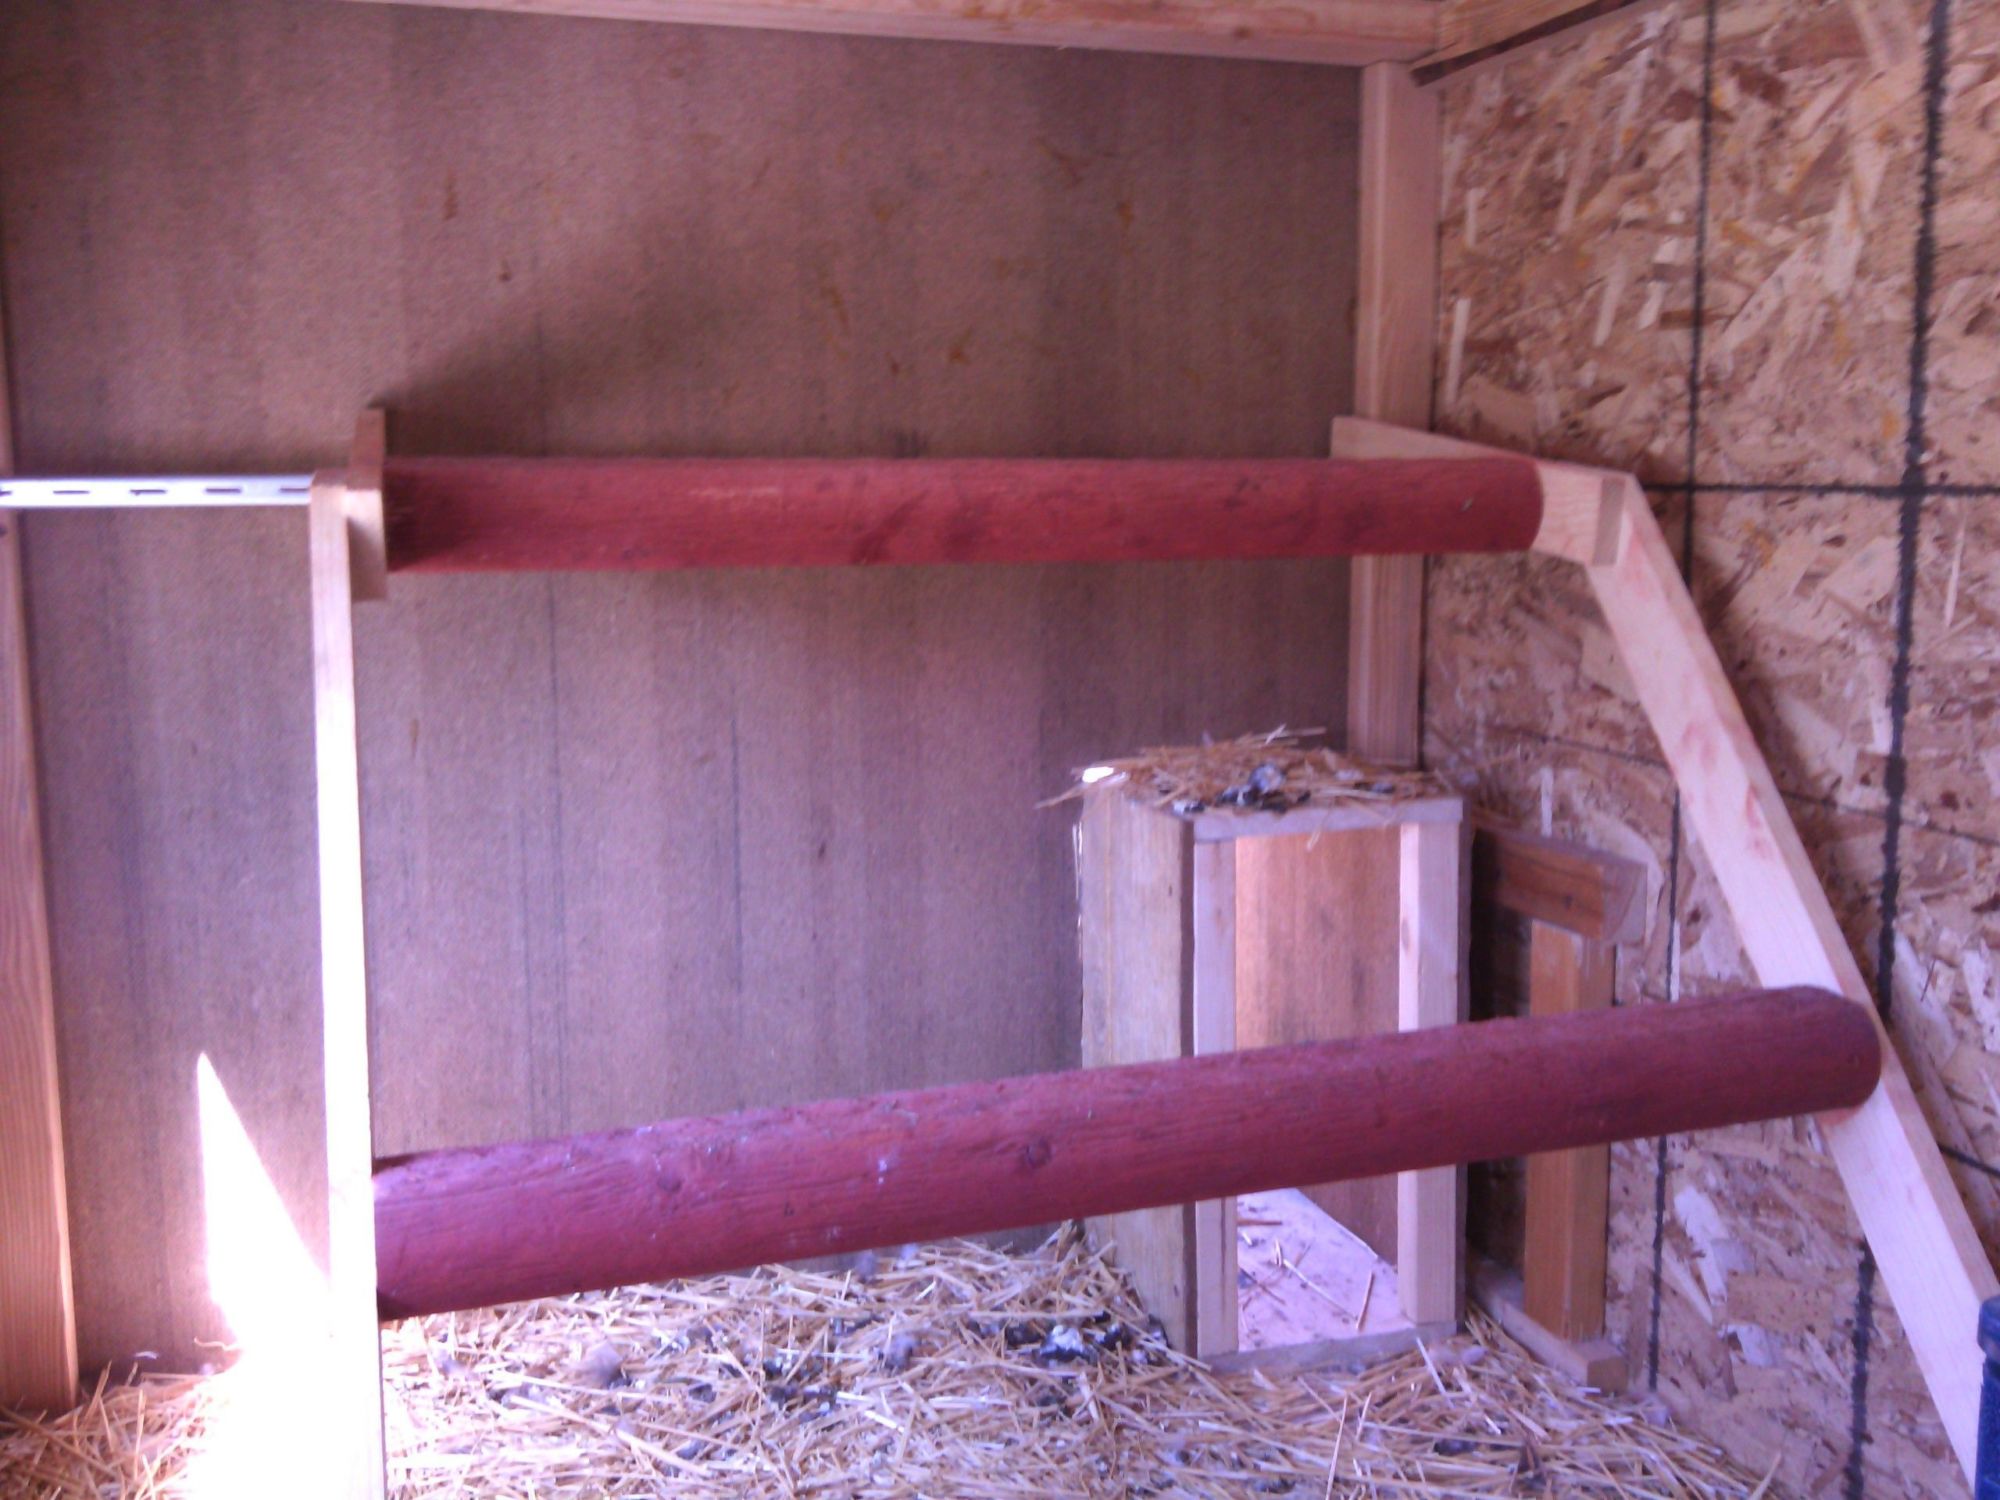 roosting bars are removable for coop cleaning